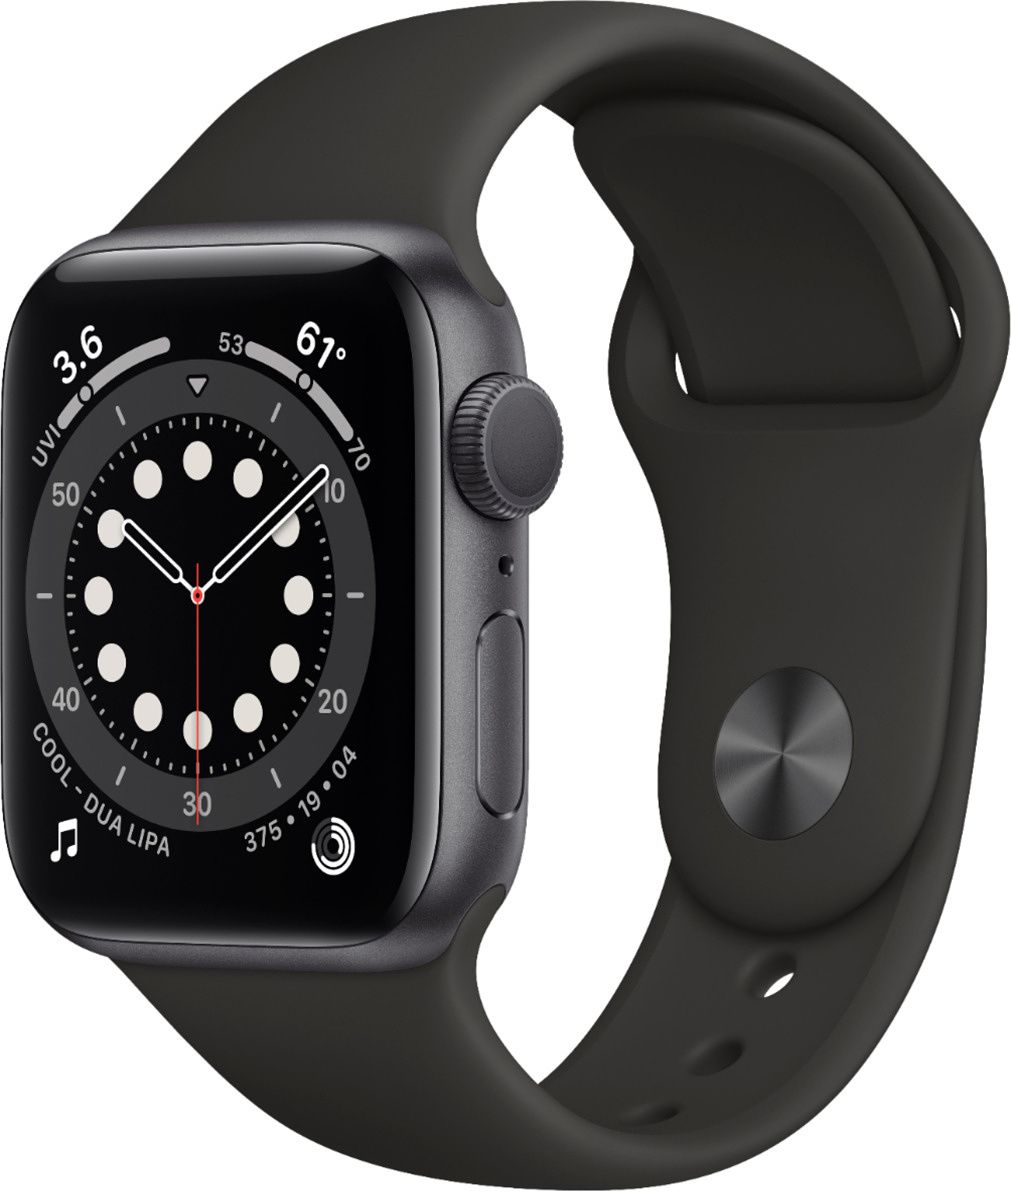 Get a 40mm Apple Watch Series 6 for $70 off today